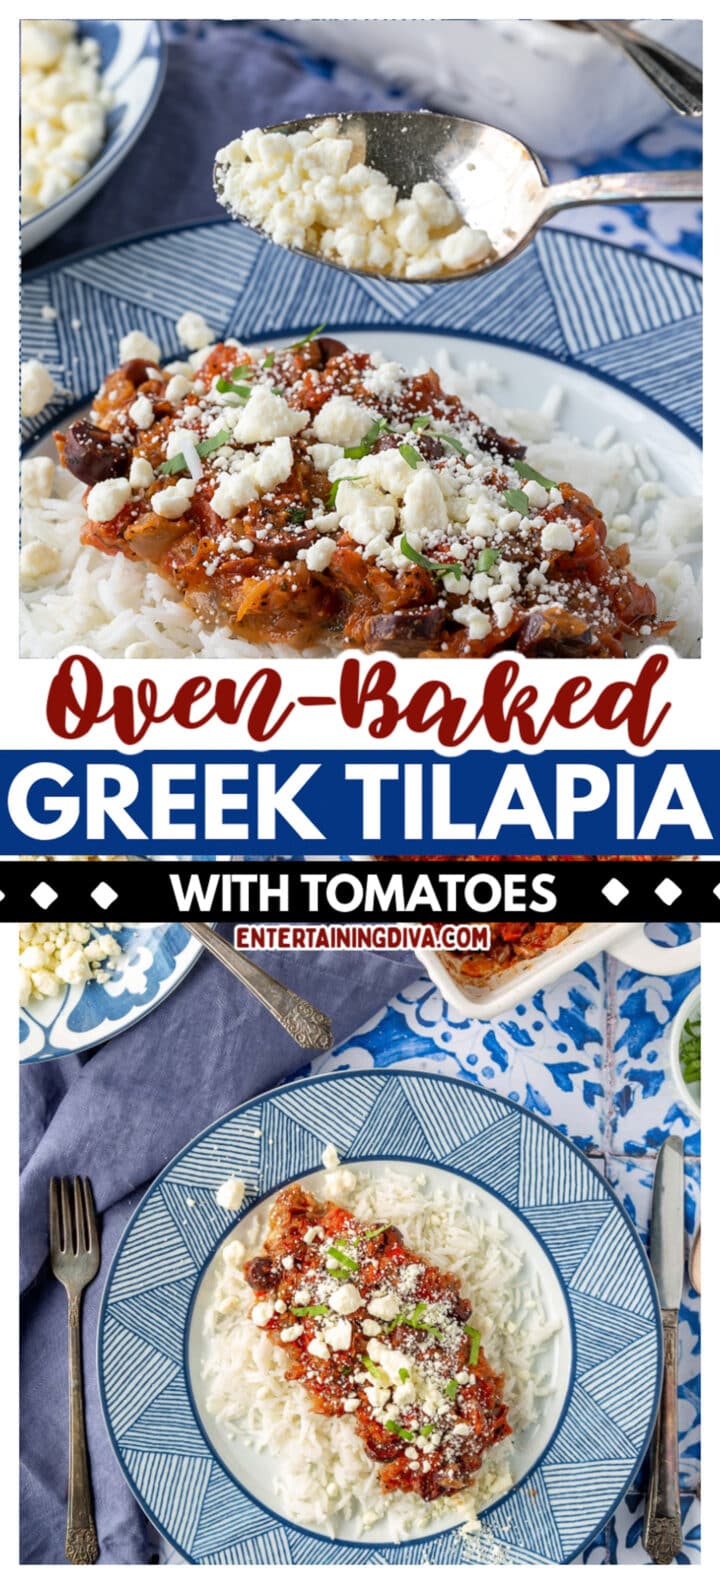 Oven-baked Greek Tilapia With Tomatoes